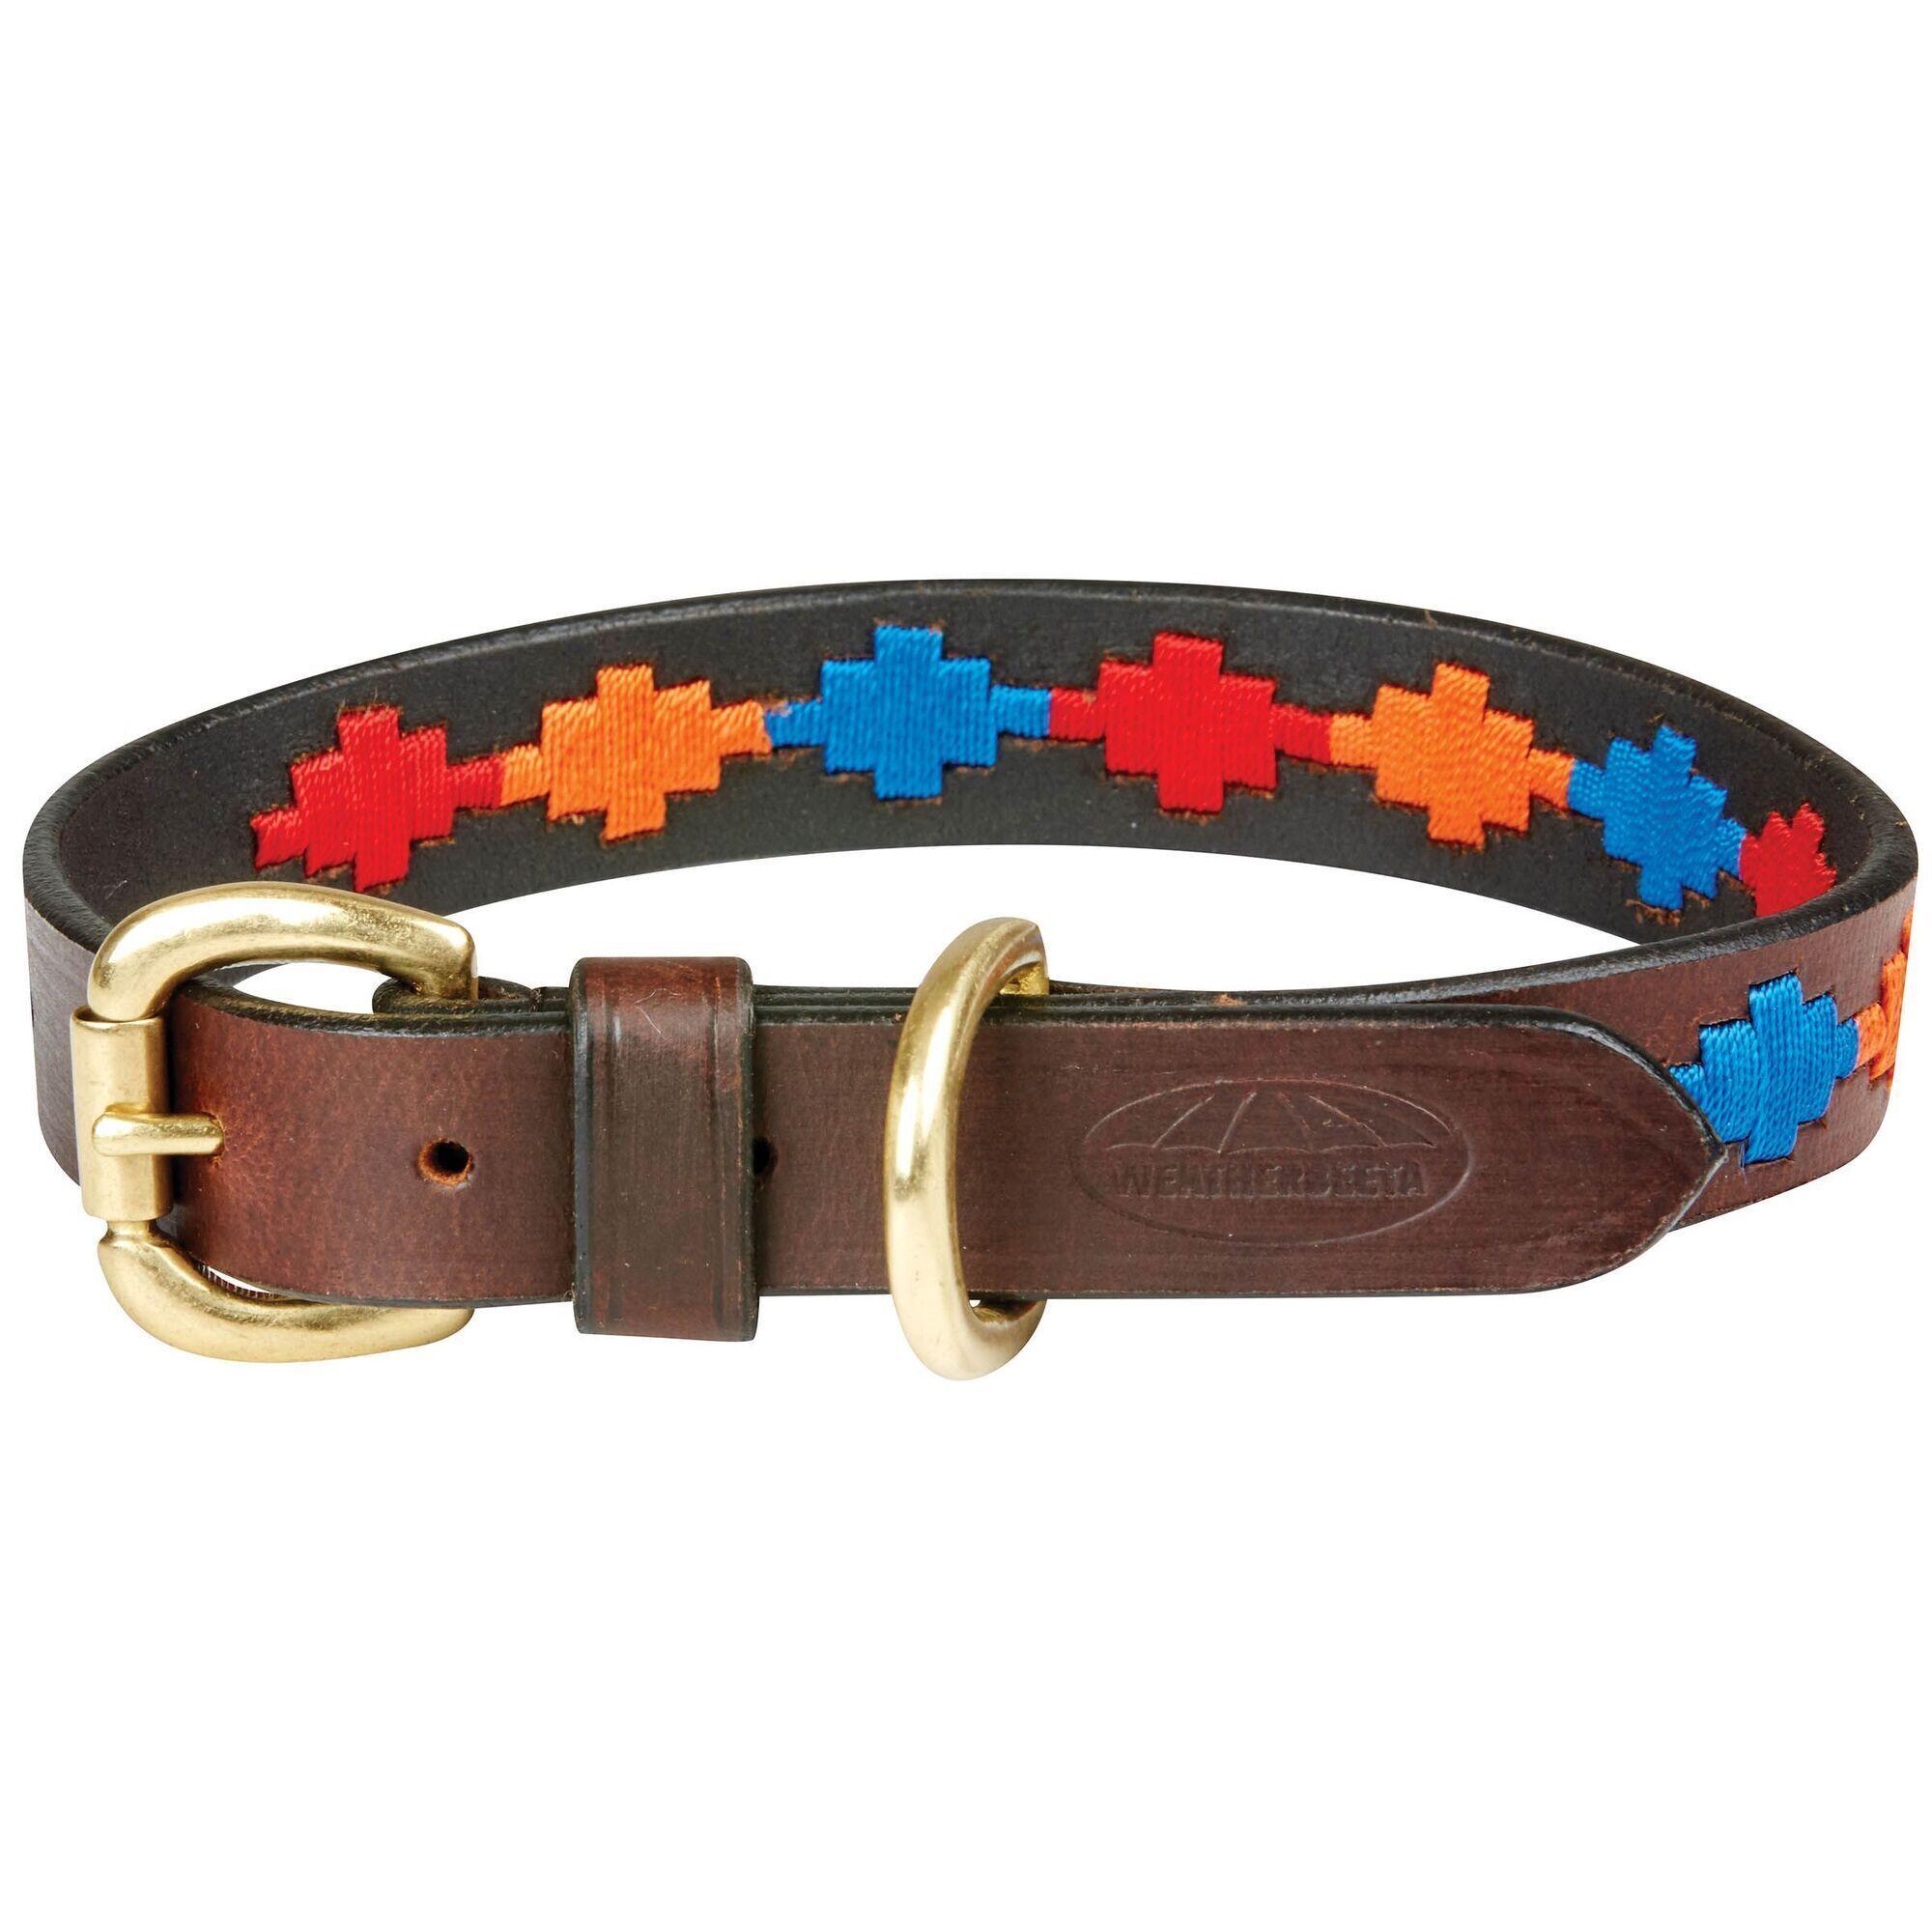 Polo Leather Dog Collar (Brown/Red/Orange/Blue) 1/3